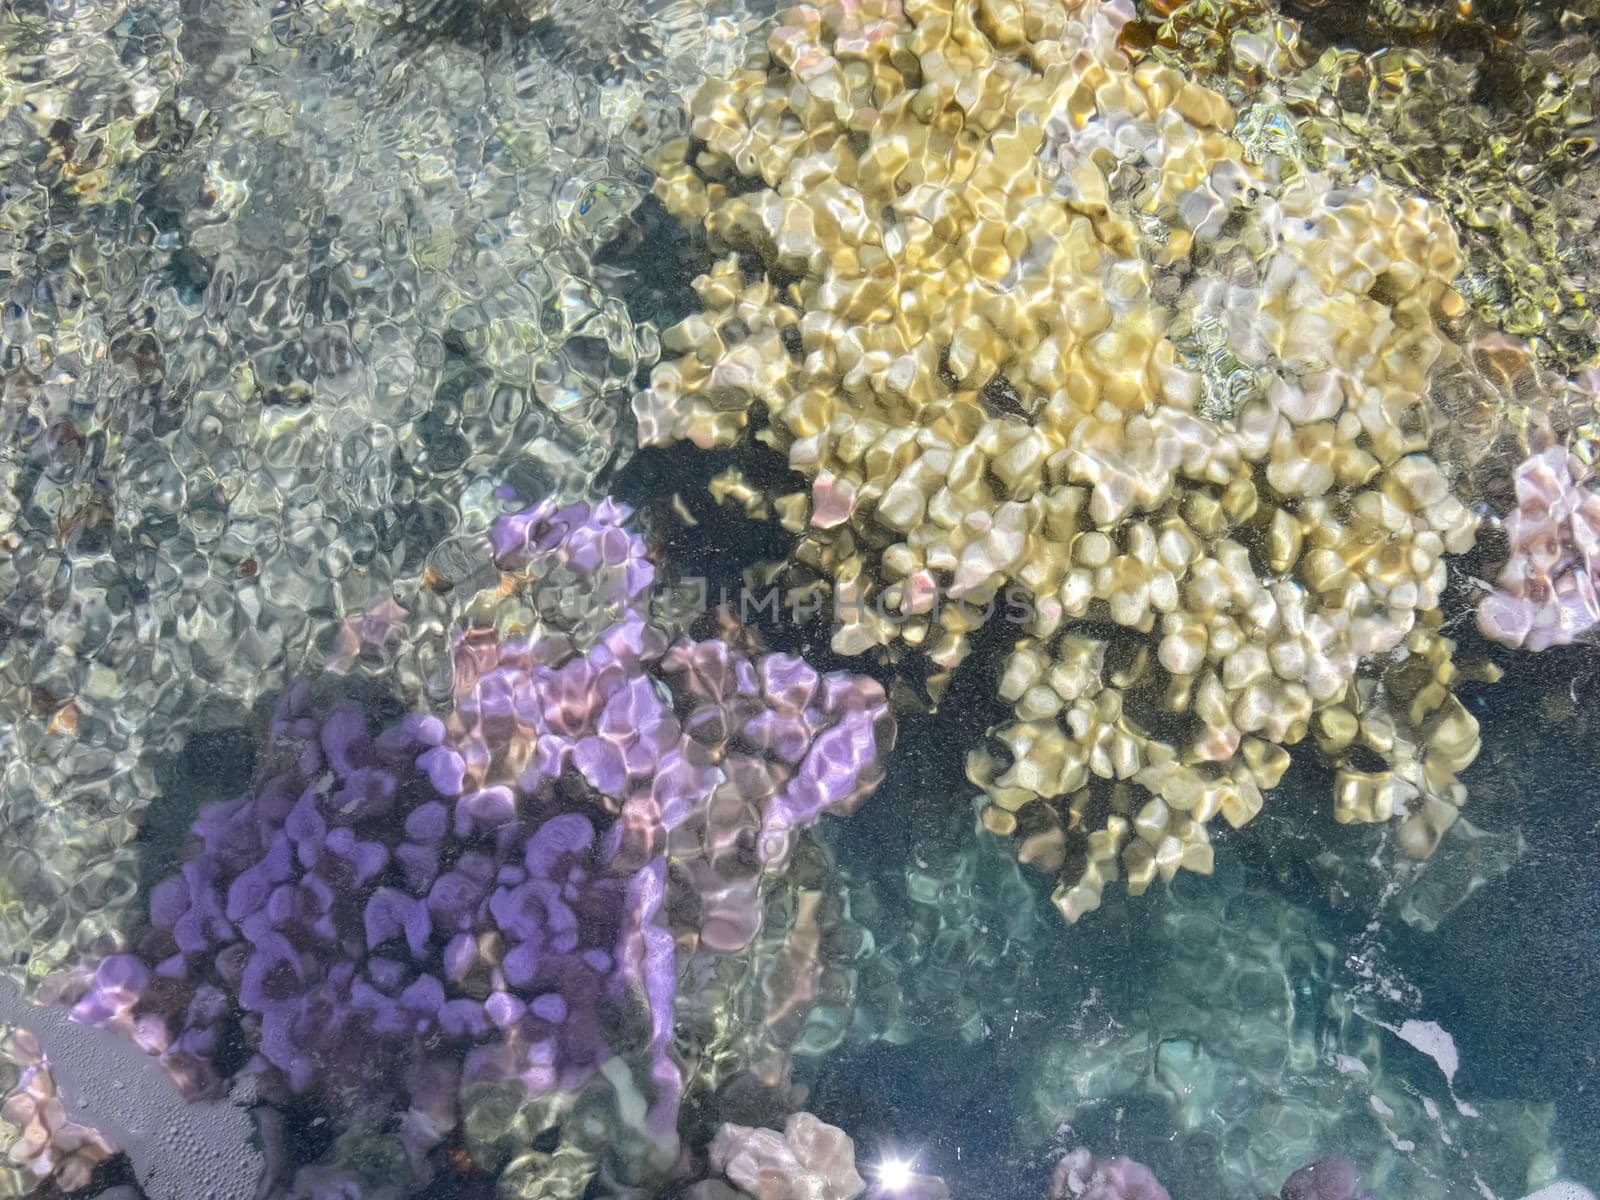 Sea corals near shore in shallow water. Easter Island. by DePo